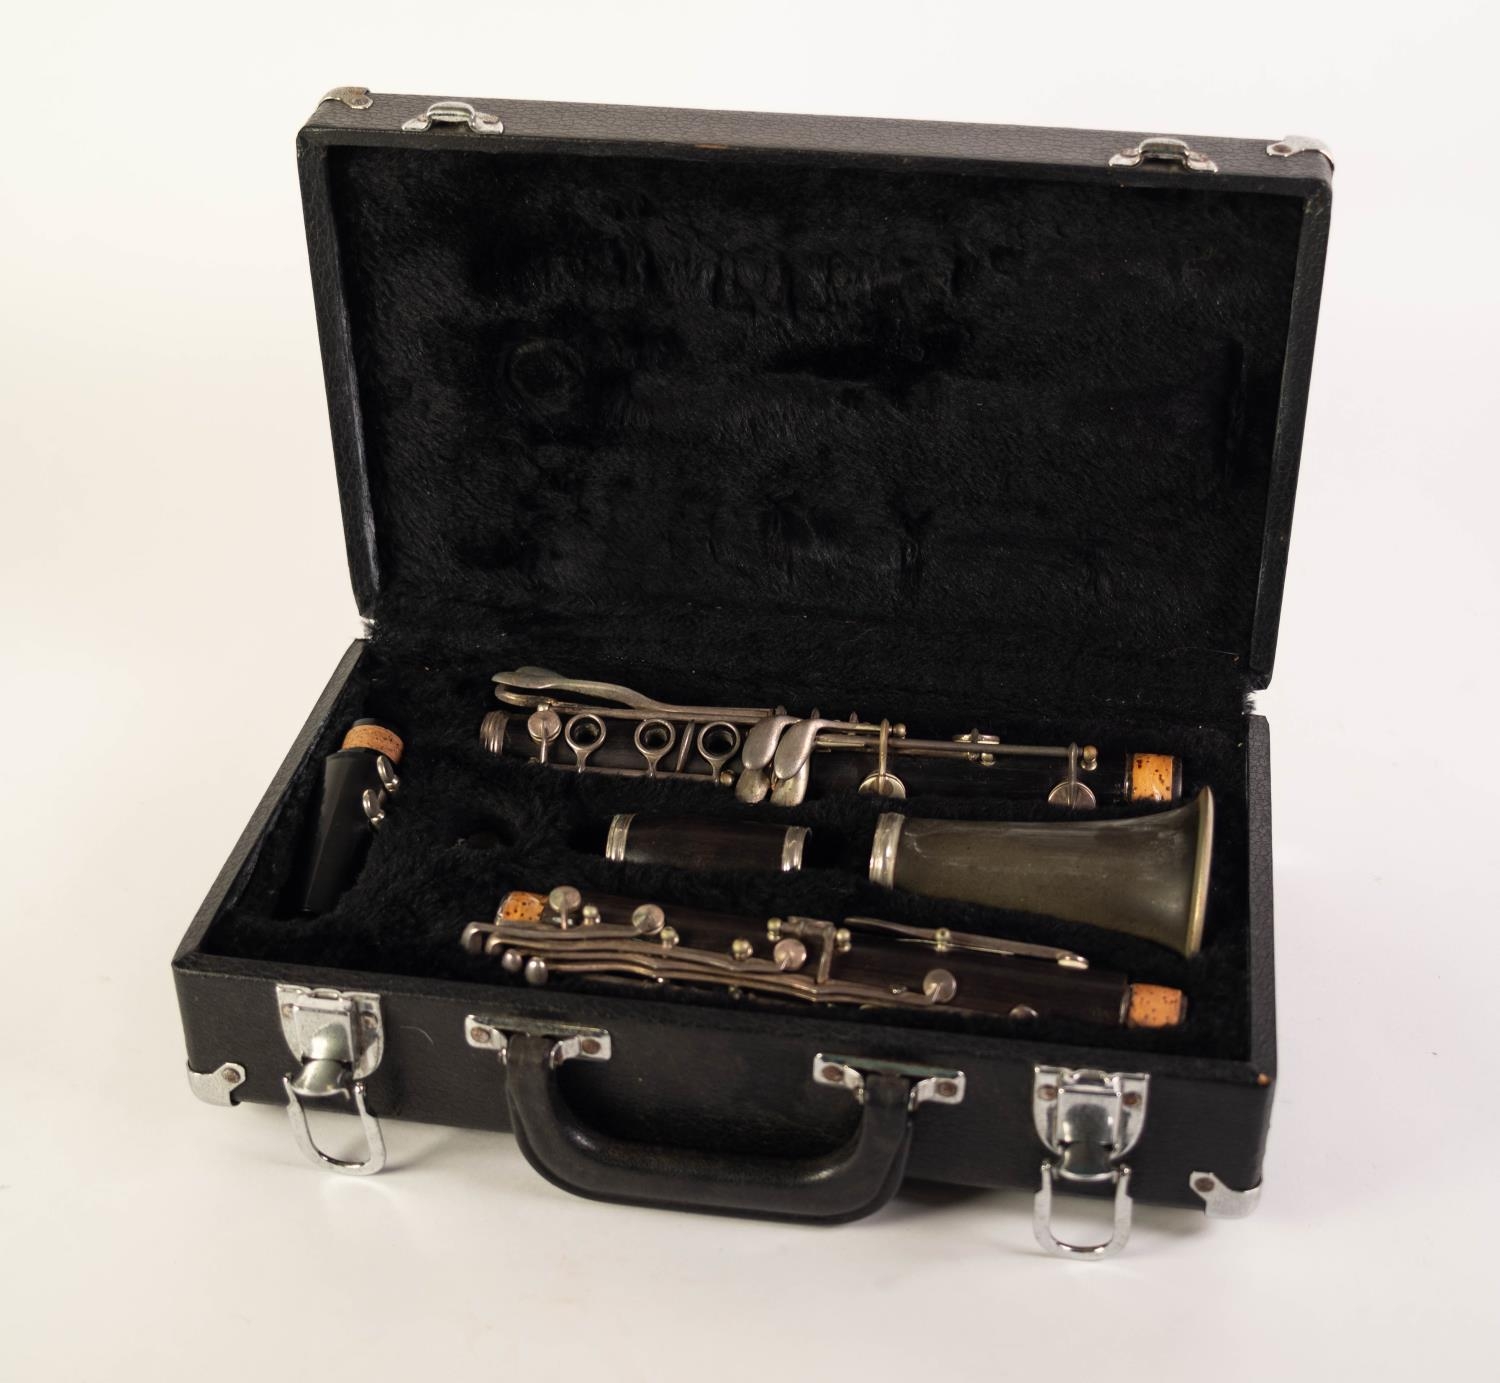 MID TWENTIETH CENTURY HARDWOOD AND MOULDED COMPOSITION UNBRANDED FIVE PIECE CLARINET, with plated